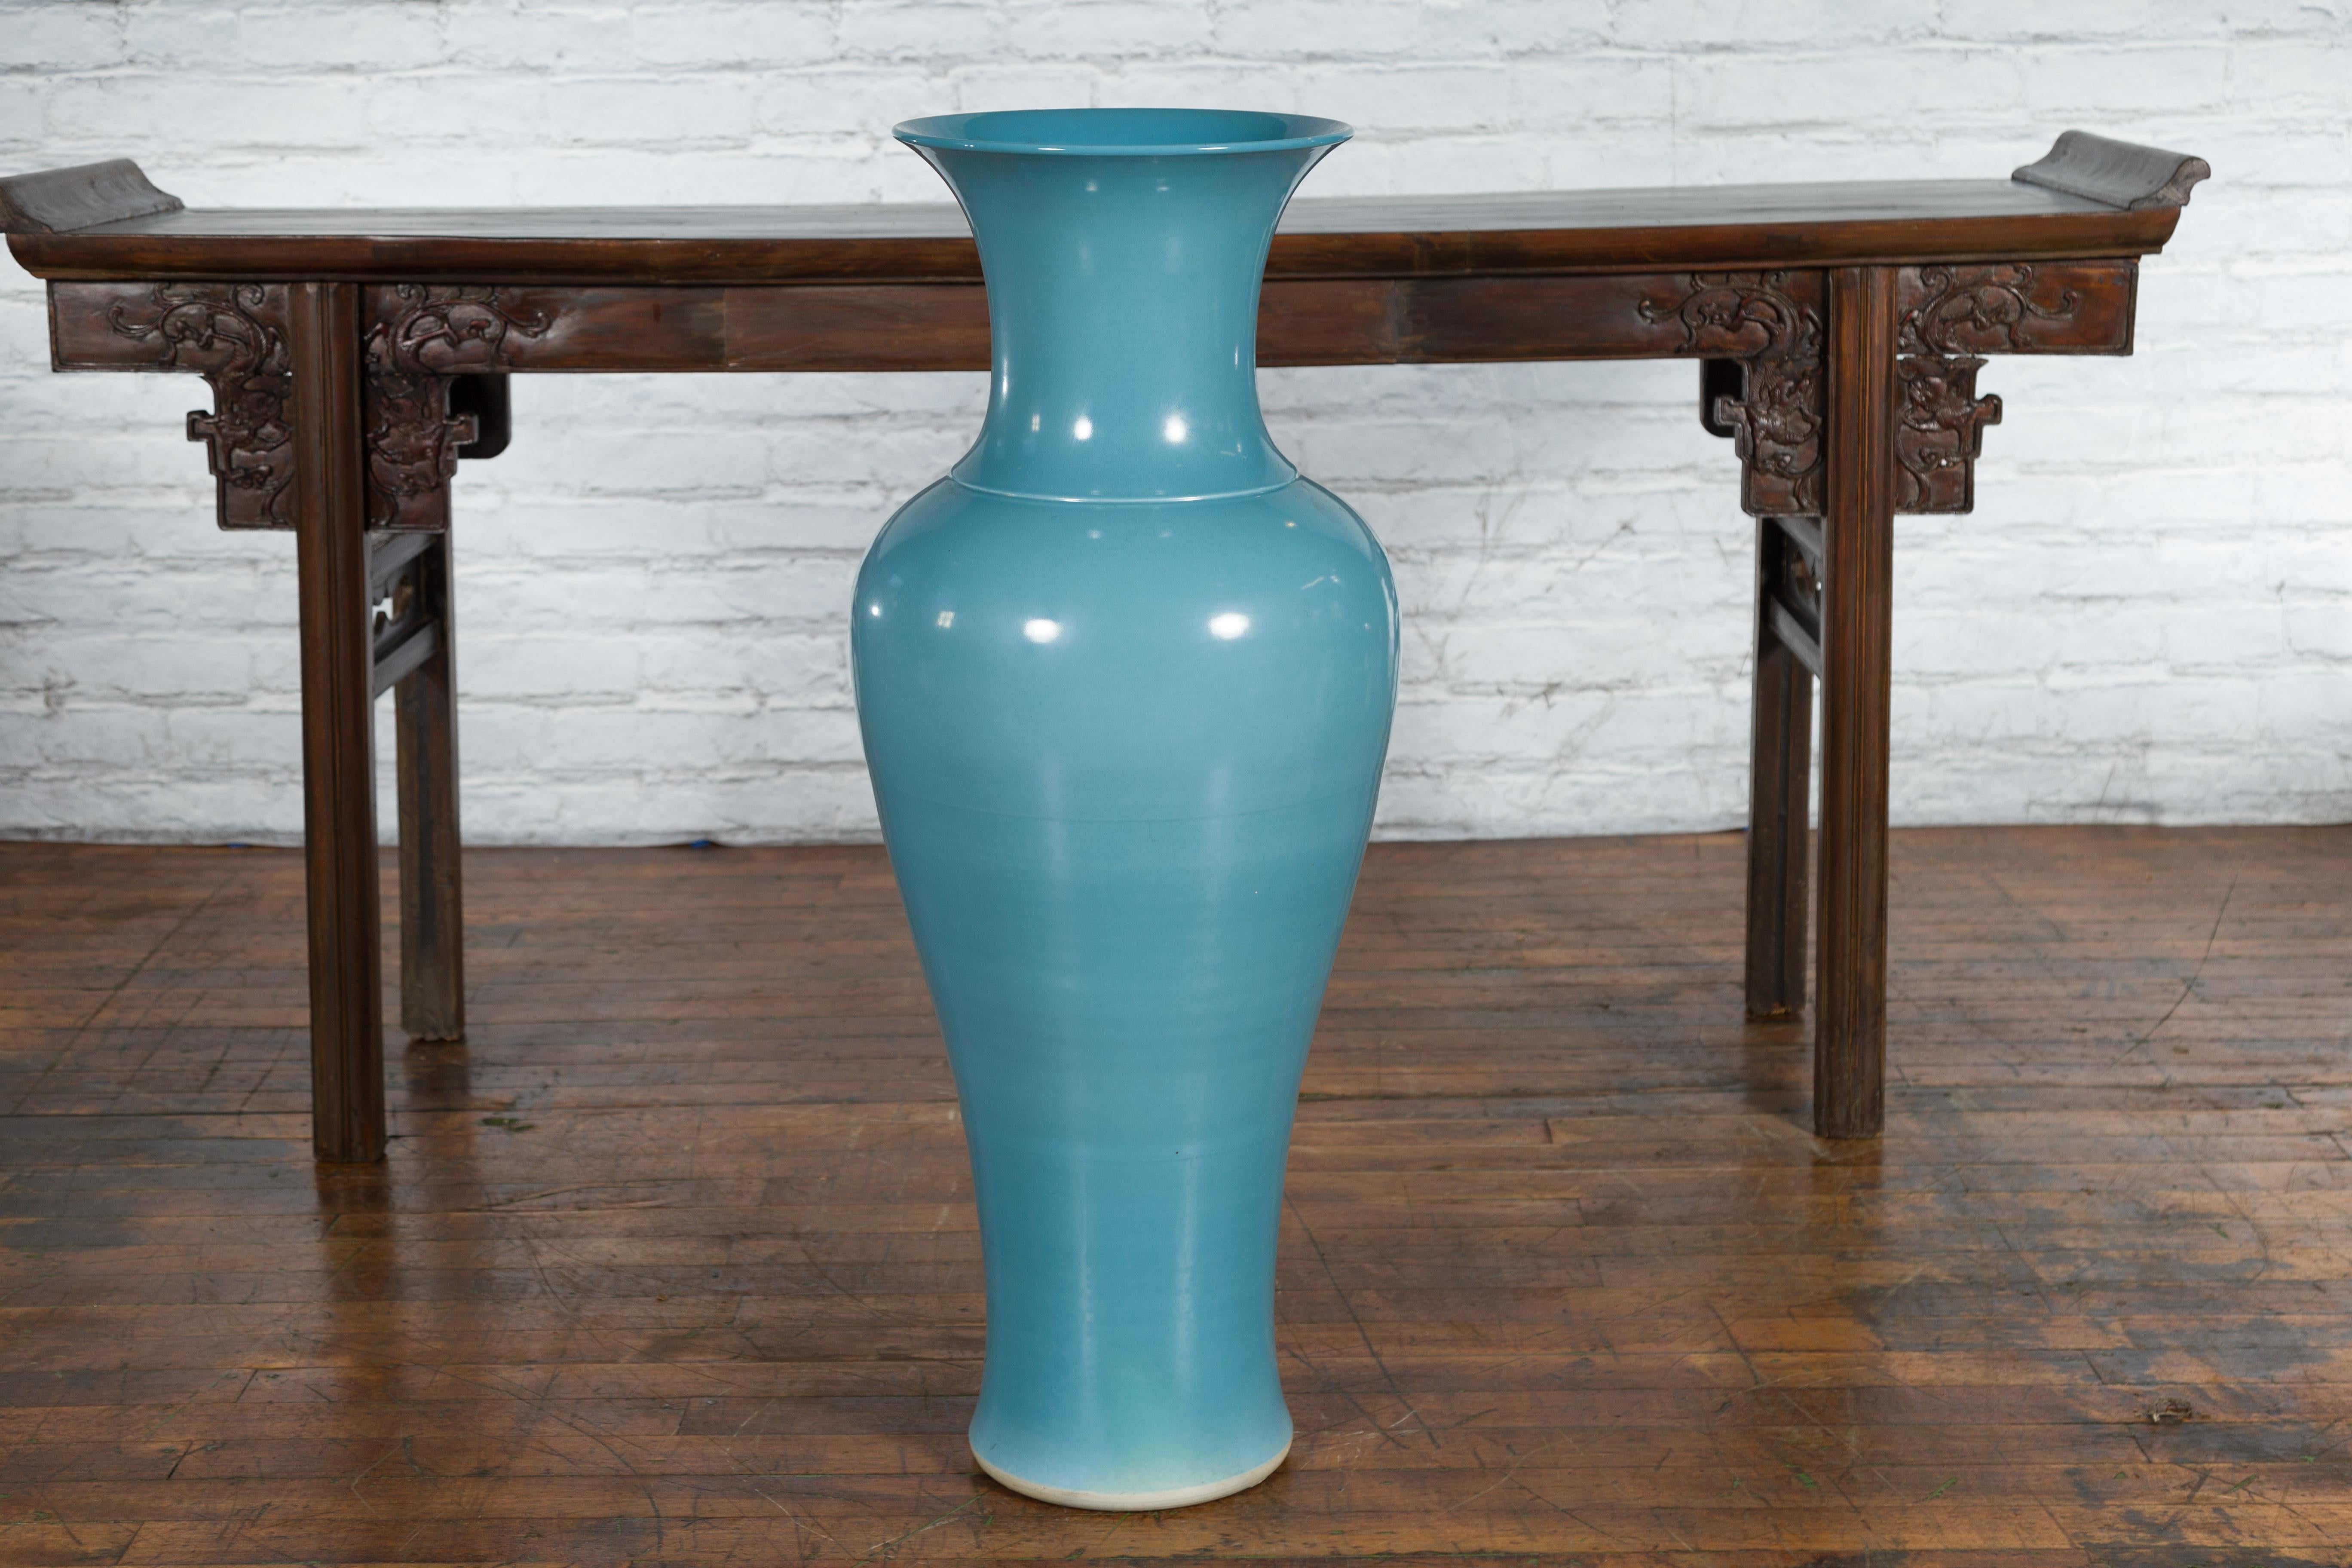 A large Prem Collection blue glazed artisan ceramic vase from the mid 20th century with flaring neck. Created in Chiang Mai, northern Thailand during the Midcentury period, this large Prem Collection vase attracts the attention with its sinuous